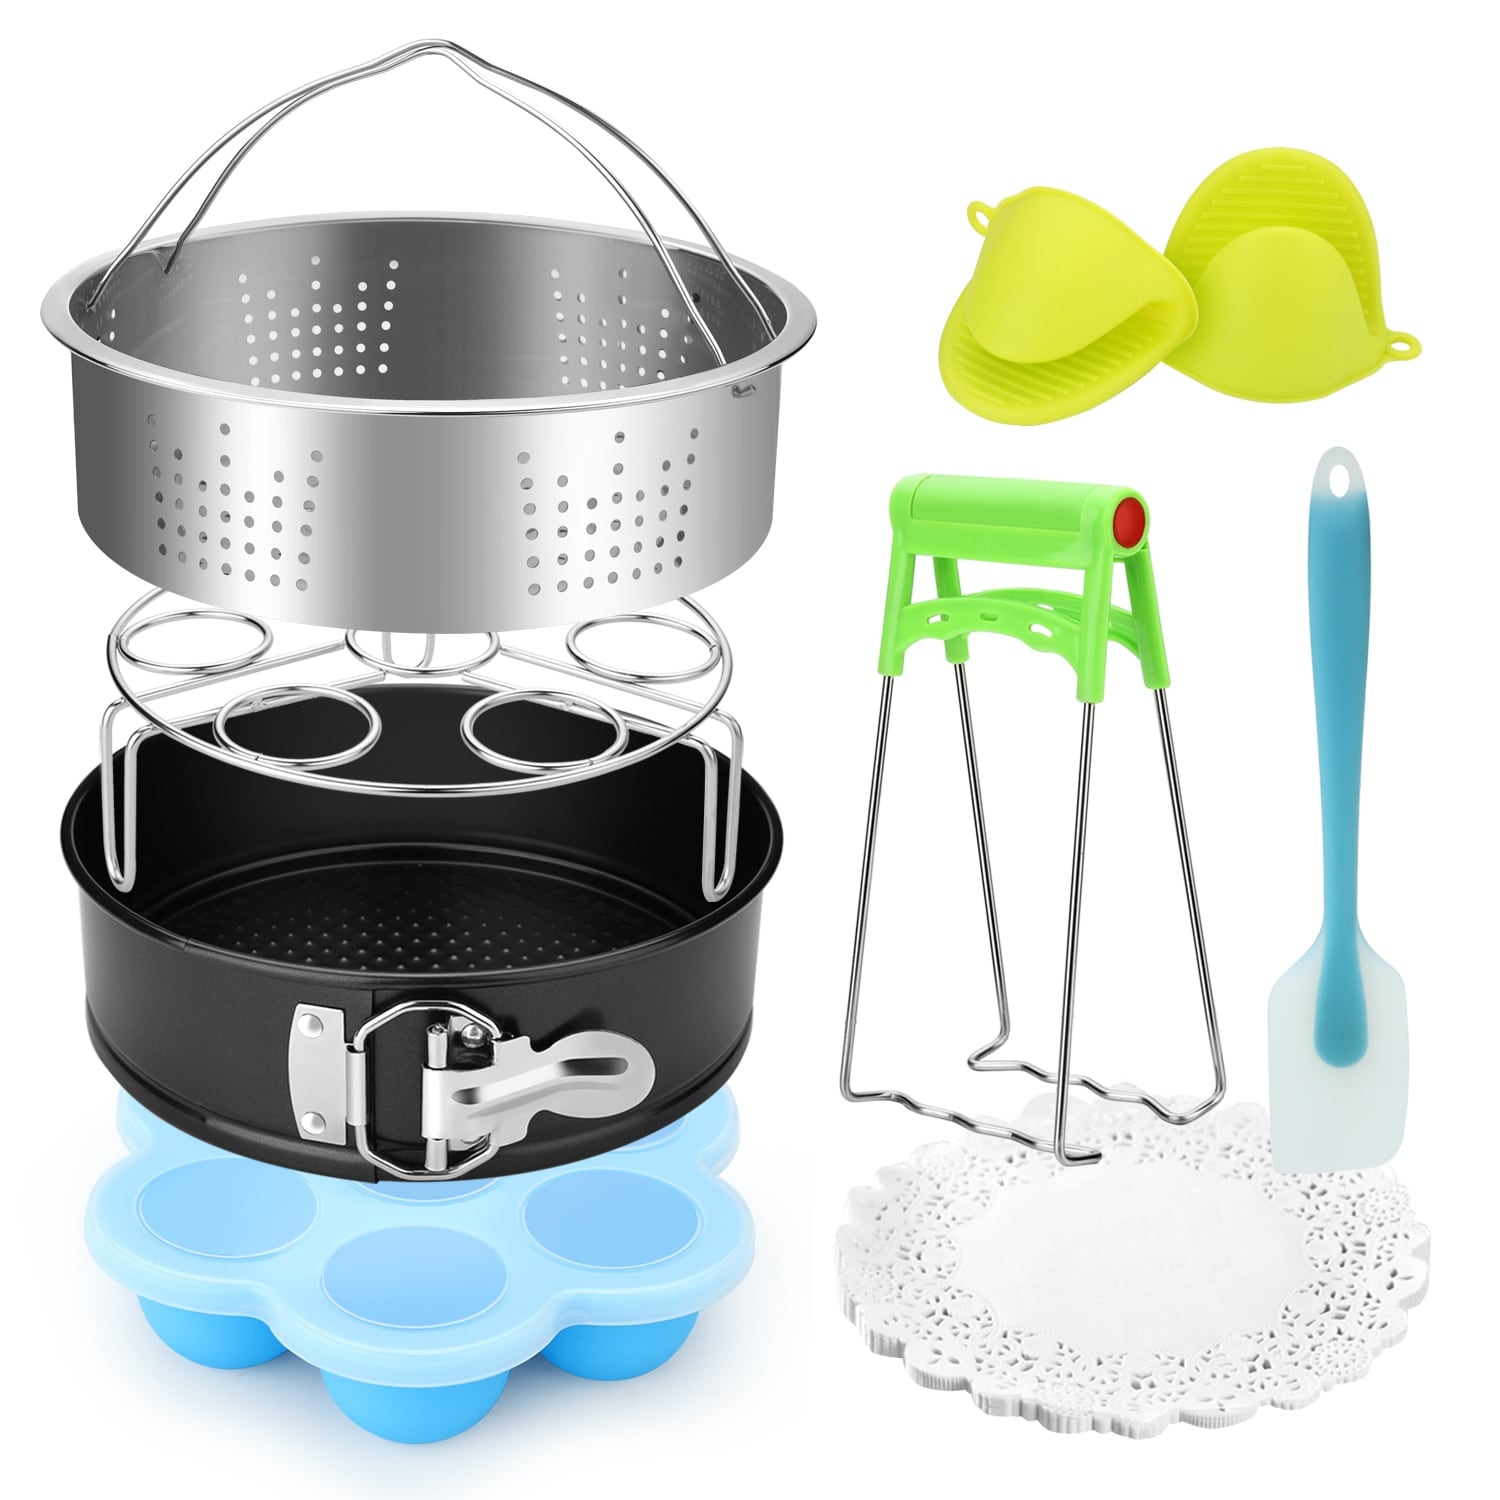  Accessories Set for Instant Pot Pressure Cooker of 5,6,8Qt  ,9-Pcs-Steamer Basket, Silicone Egg Bite, Non-stick Cake Pan, Steaming  Rack, Silicone Cooking Pot Mitts and Kitchen Tong: Home & Kitchen